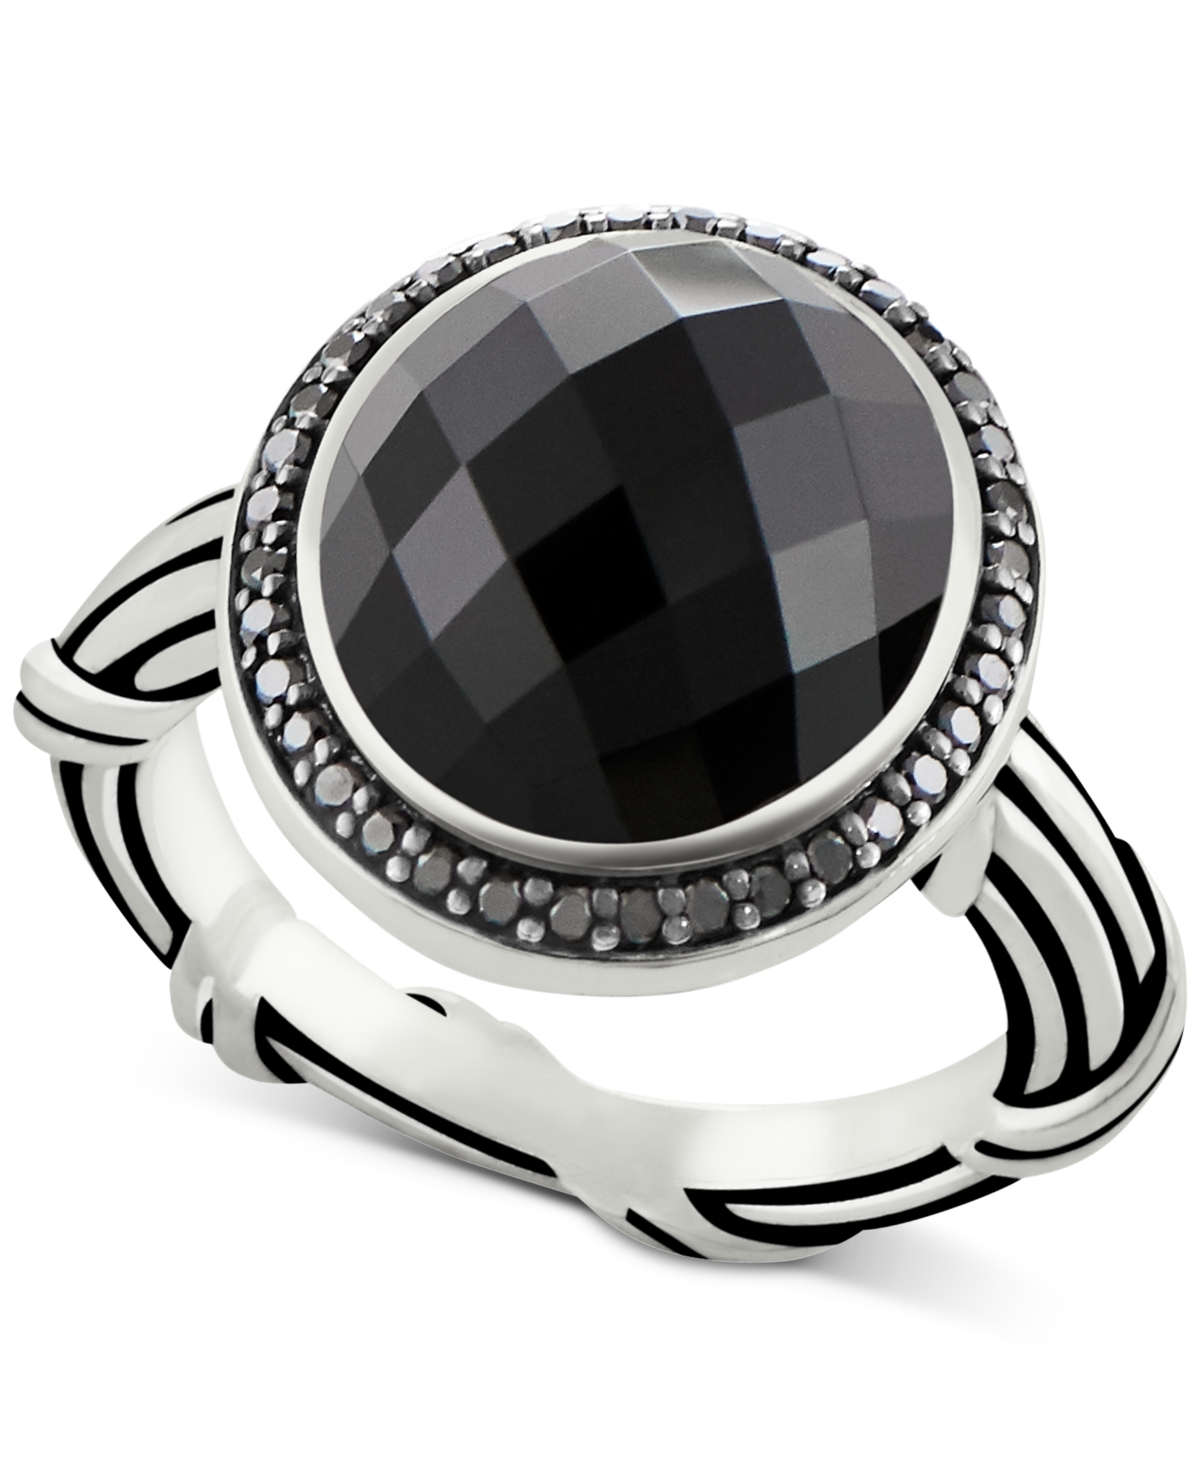 Onyx (8-2/3 ct. t.w.) & Black Spinel Ring in Sterling Silver - Black